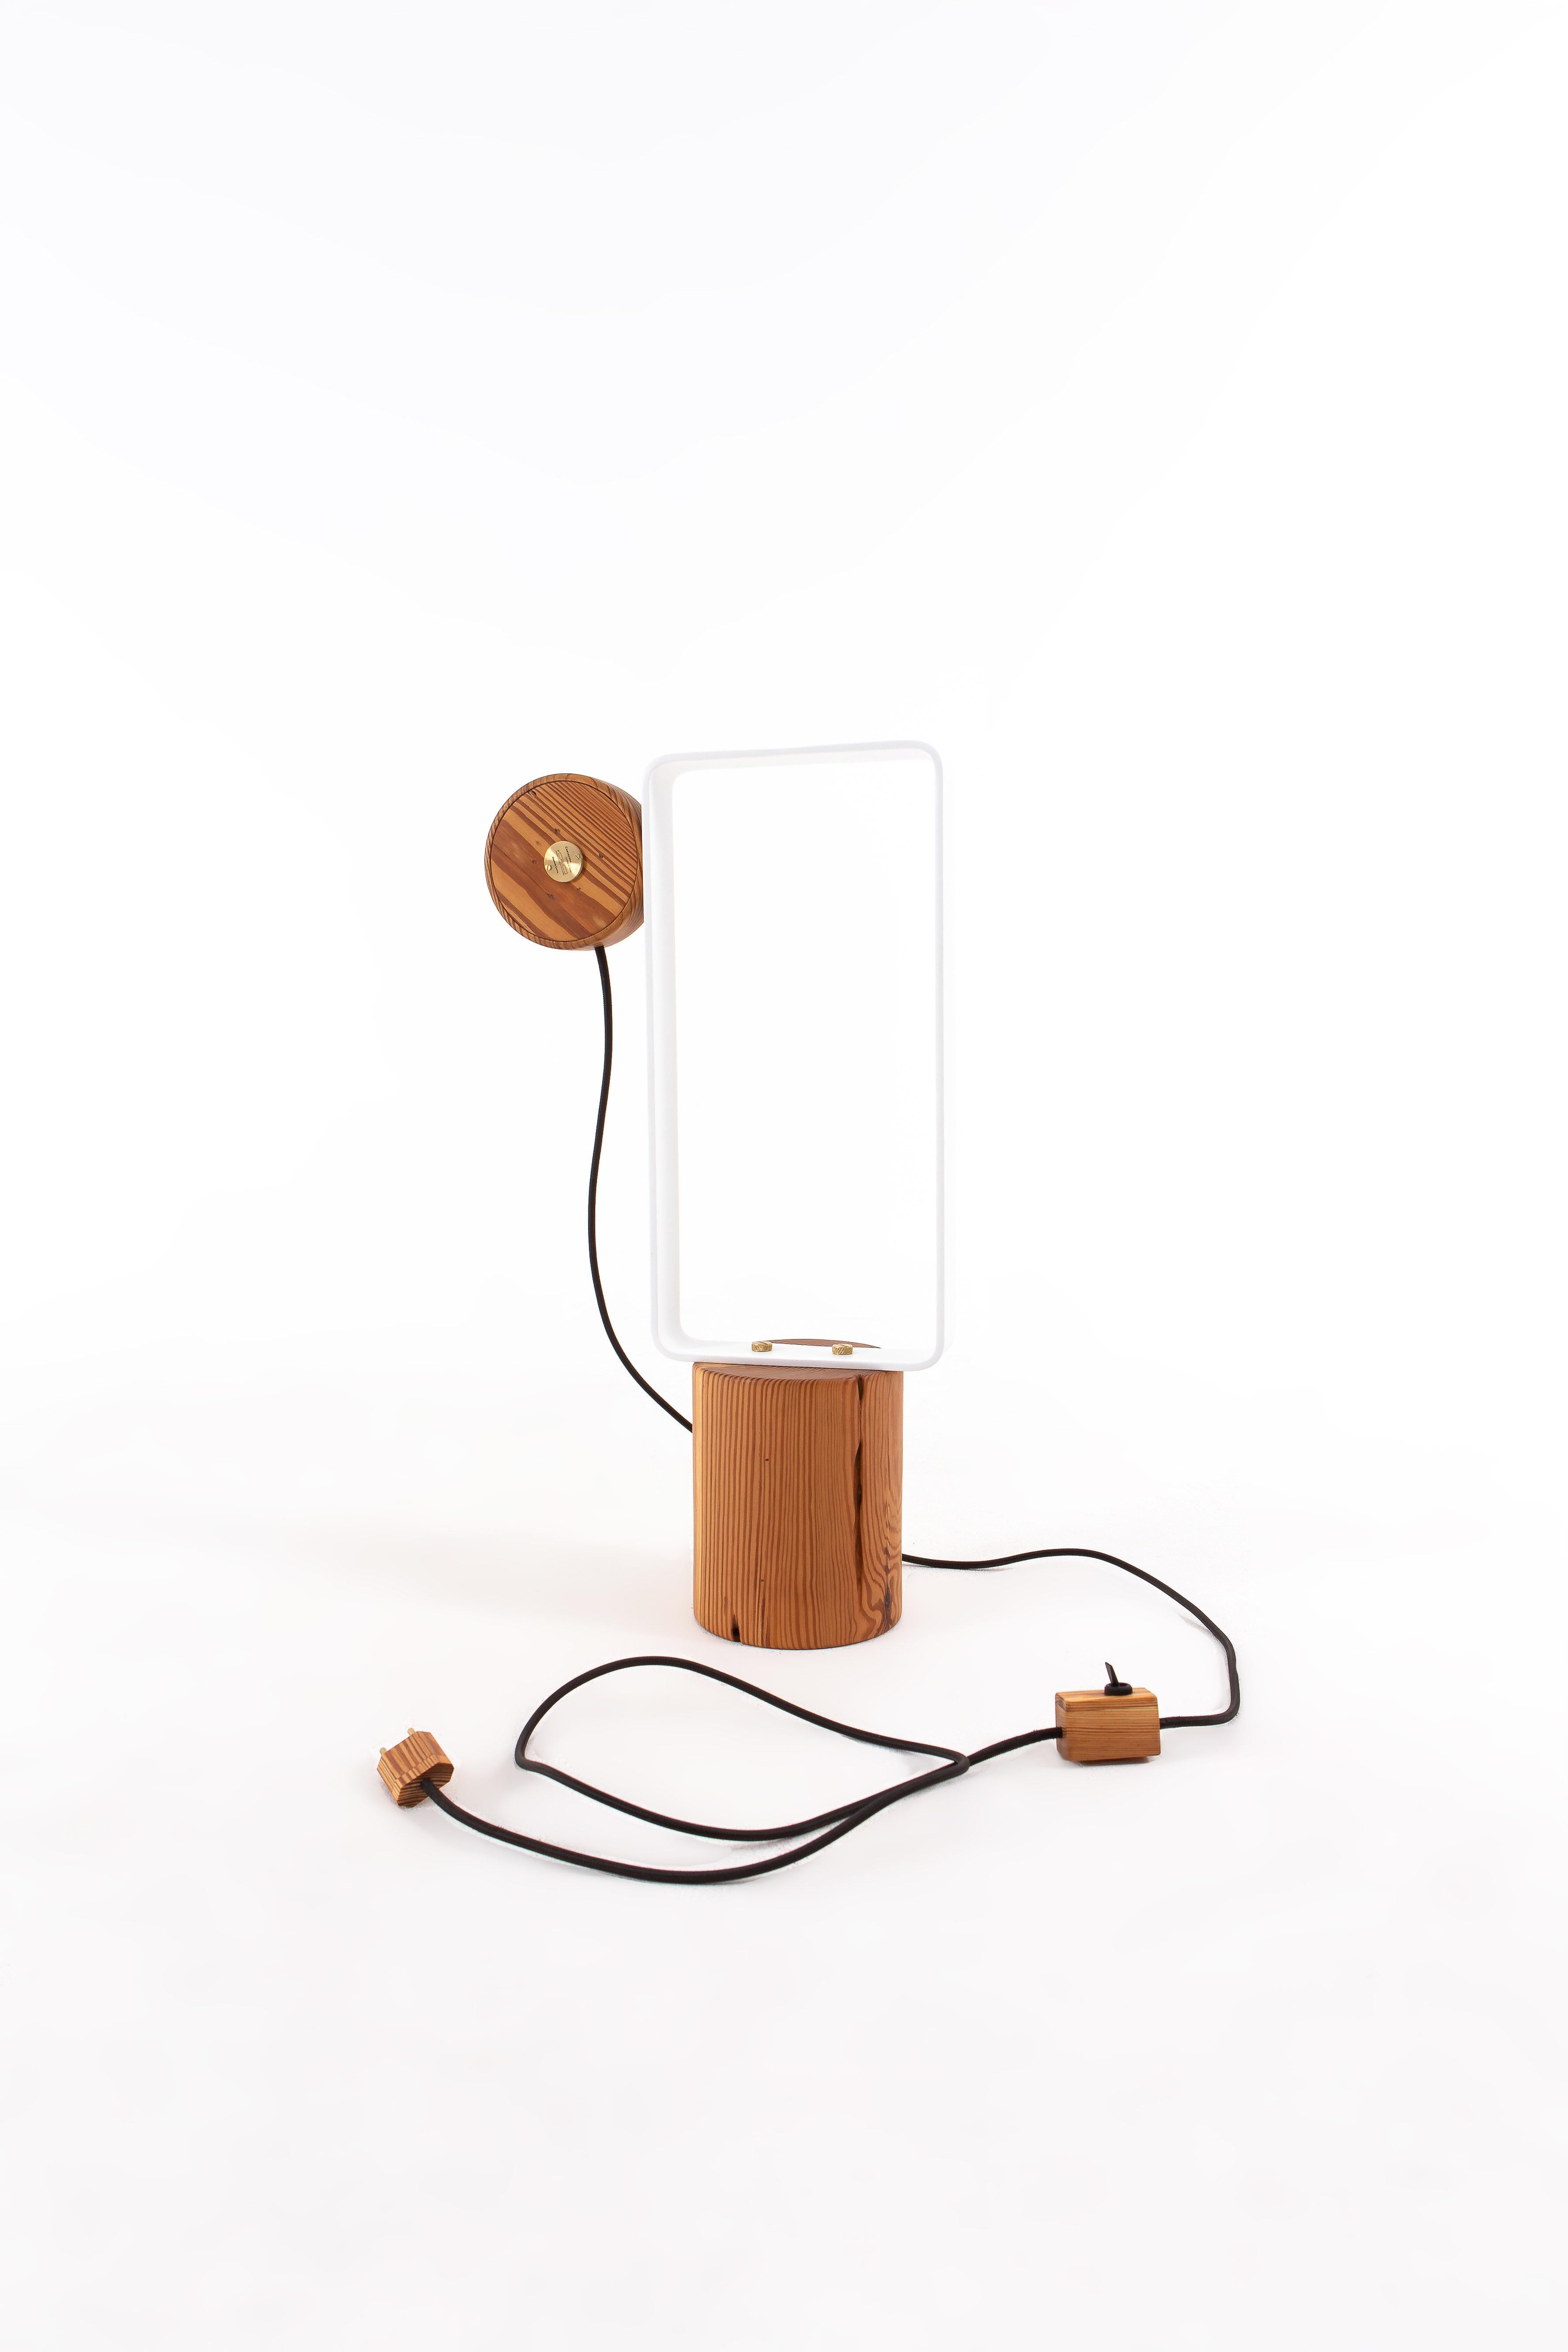 About the Lamp:

The Lamp suggests an innovative usability for its light bulb by using a magnetic system. A magnet that is underneath the wood base can be positioned all over the metallic base, allowing several types of configurations, being also